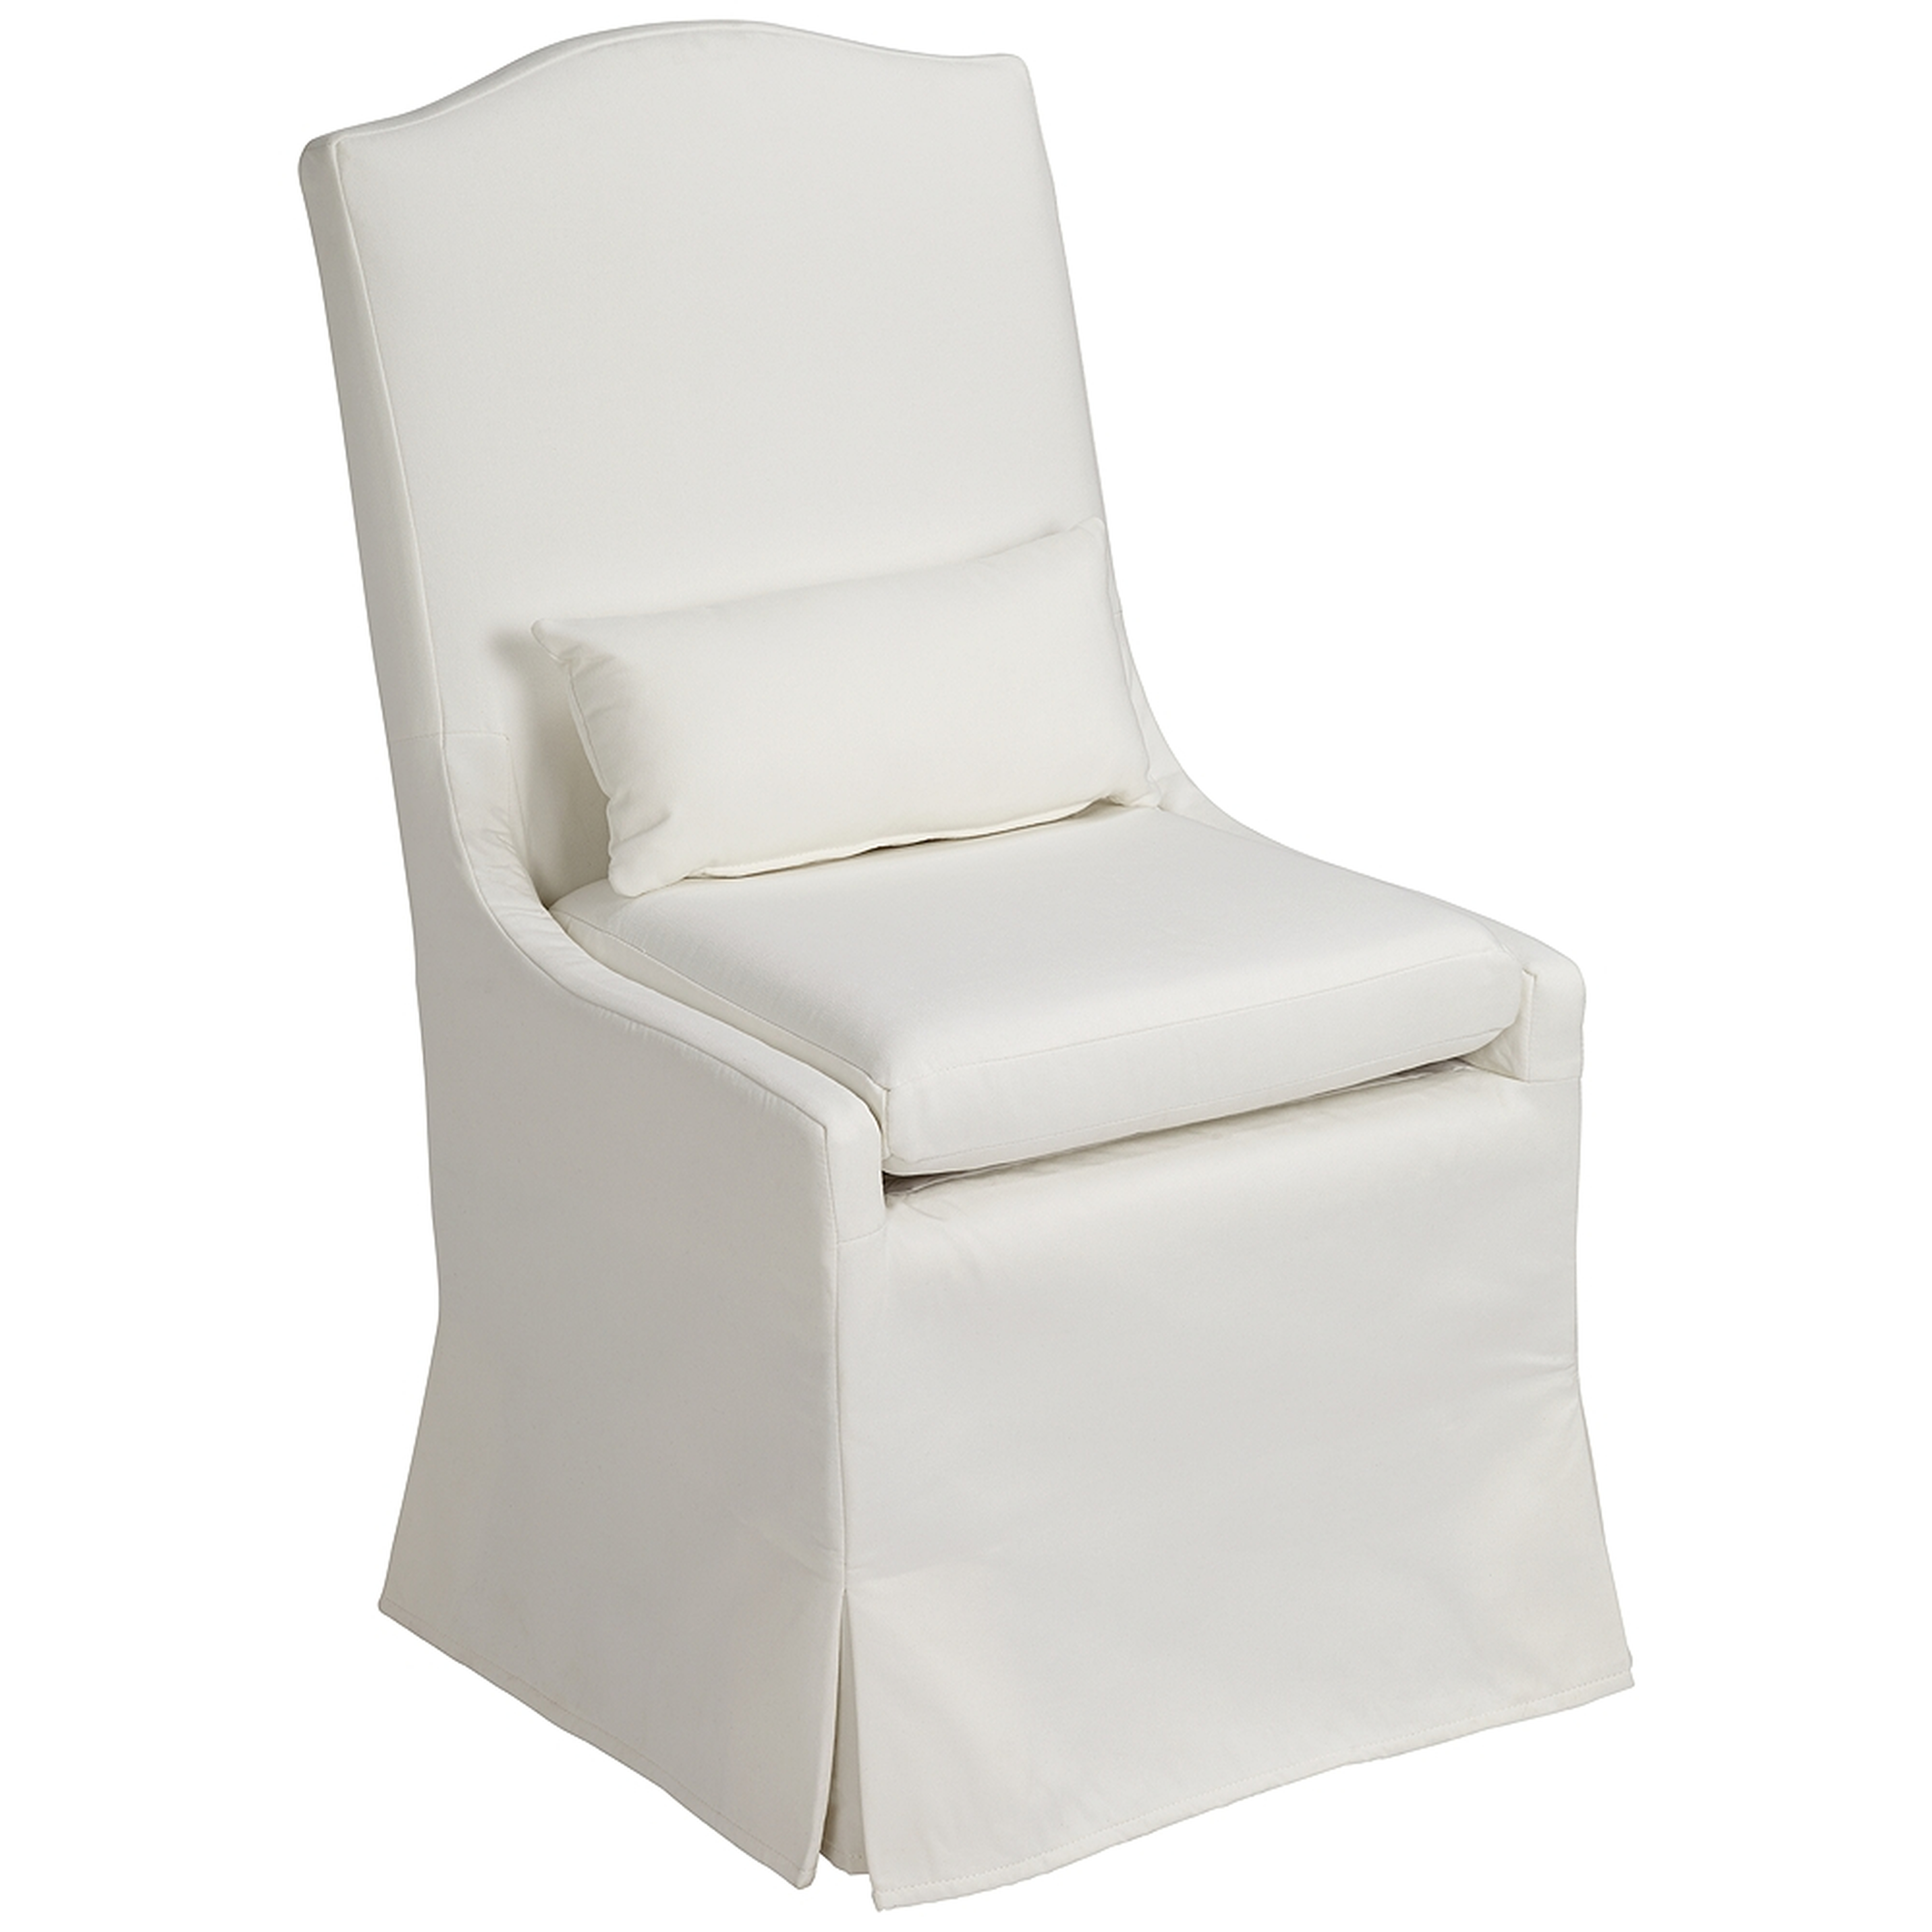 Juliete Peyton Pearl Slipcover Dining Chair - Style # 24V89 - Lamps Plus